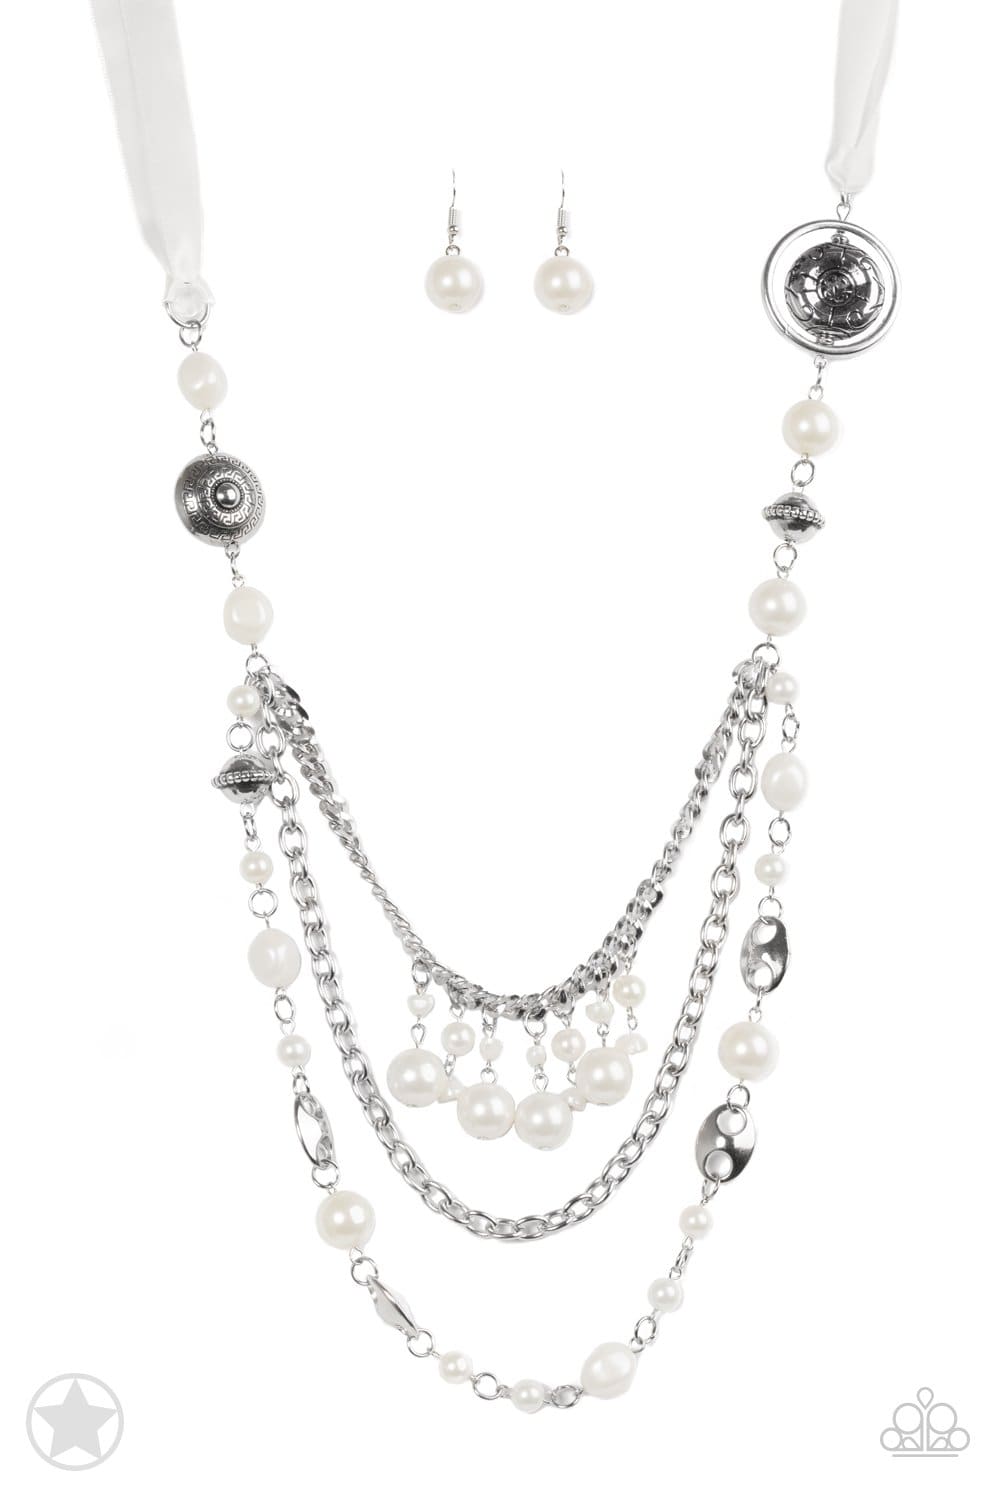 All The Trimmings - Ivory Pearl Necklace - Paparazzi Accessories - GlaMarous Titi Jewels